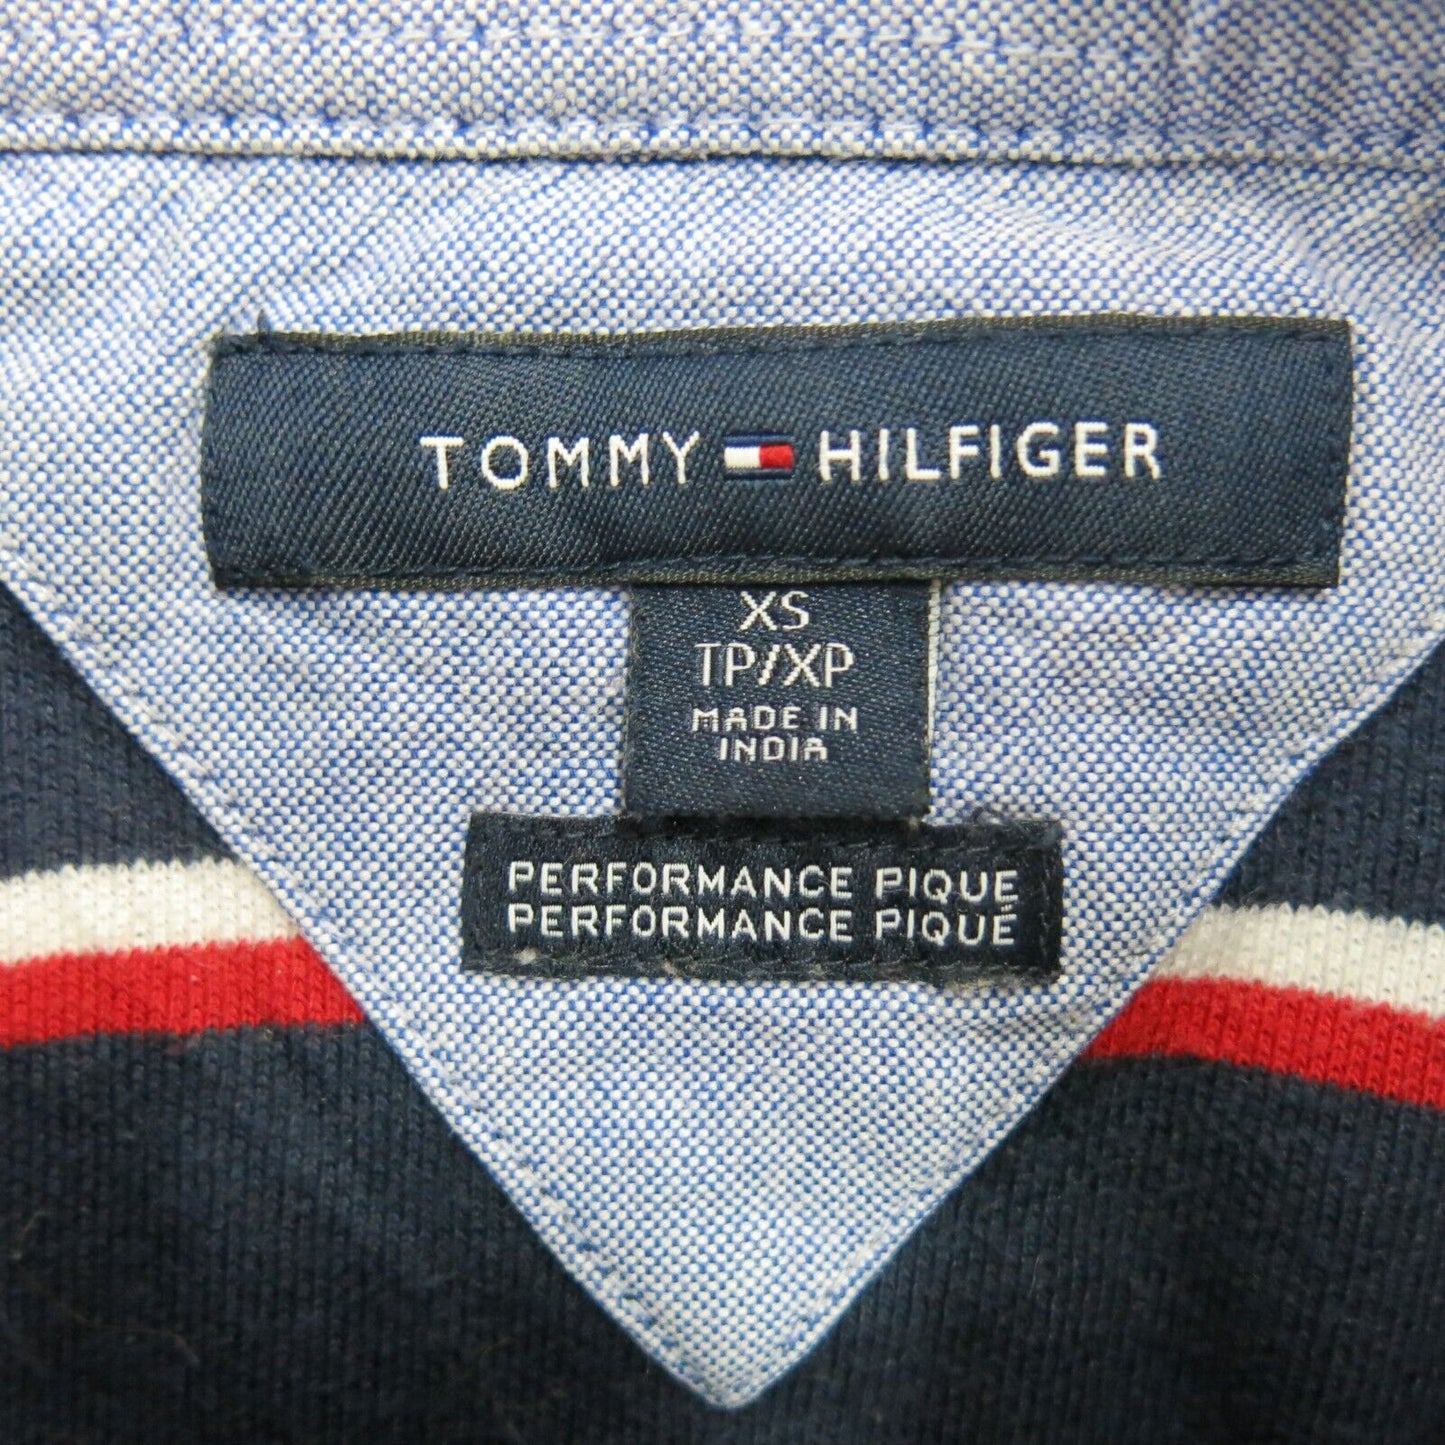 Tommy Hilfiger Mens Striped Polo Shirt Sleeves Navy Blue White Red Size XS